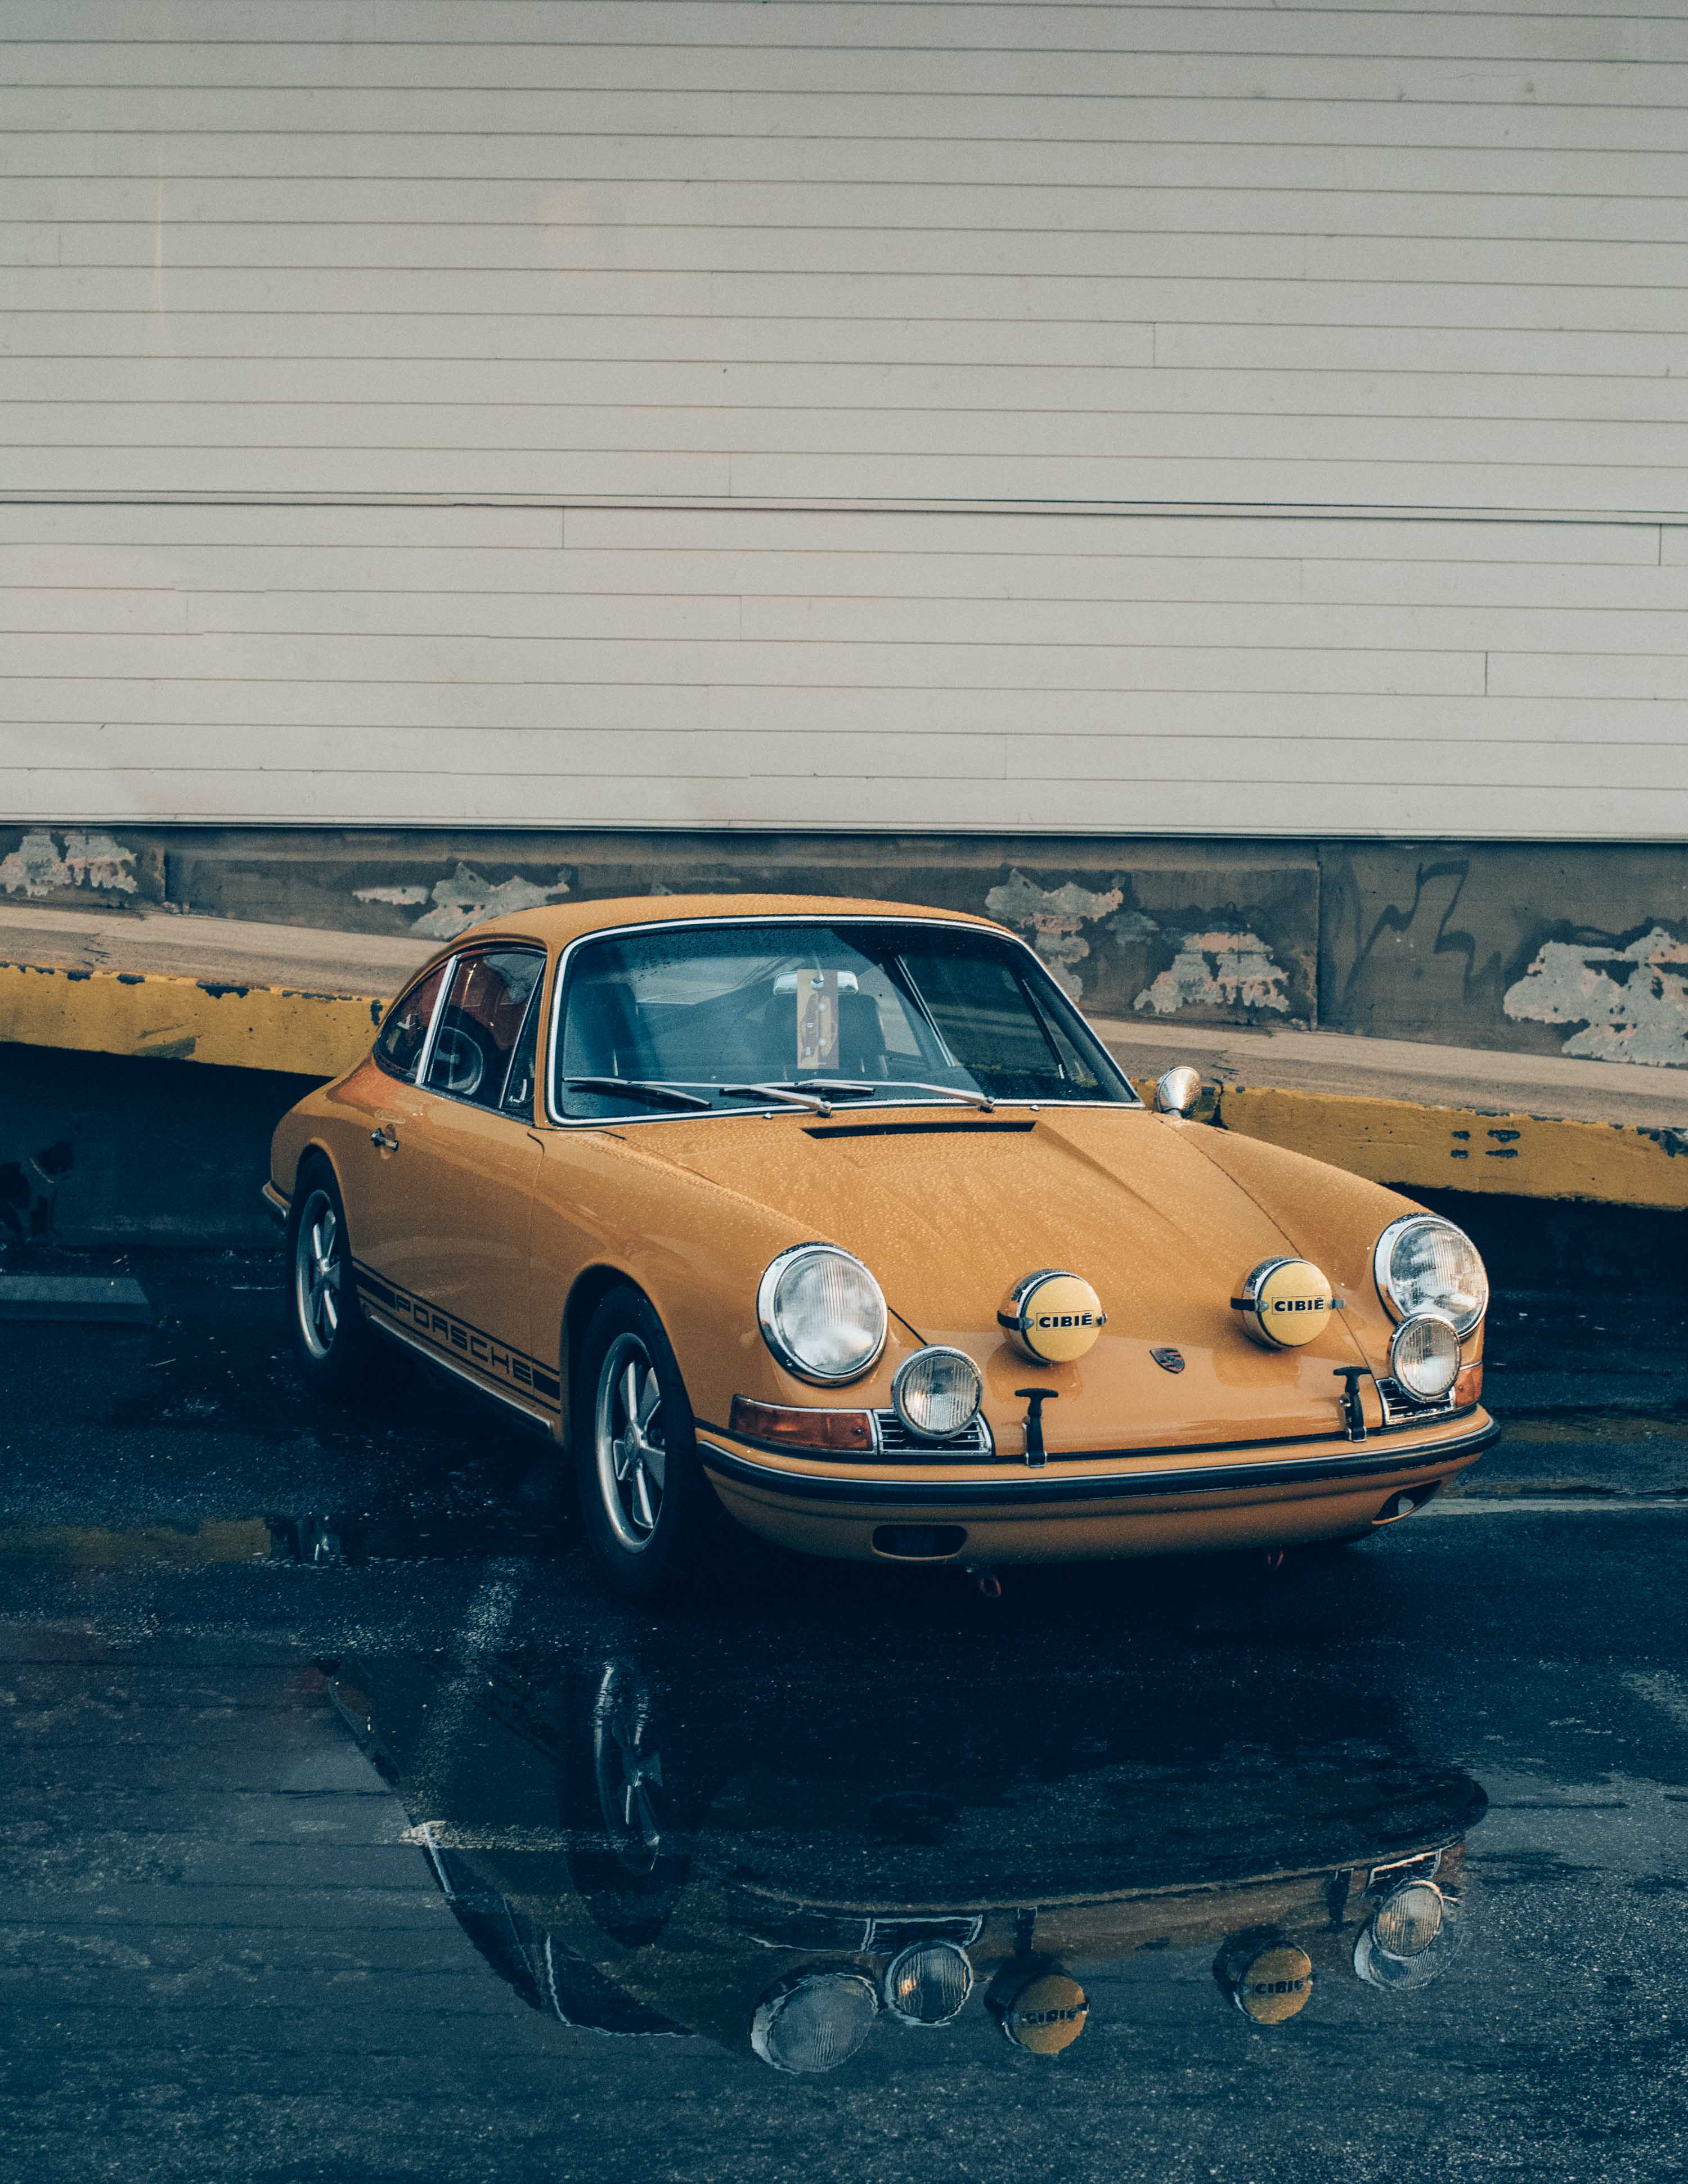 Jeff Stockwell | Film style photography of Vintage Cars in Los Angeles, CA | vintage Porsche 911